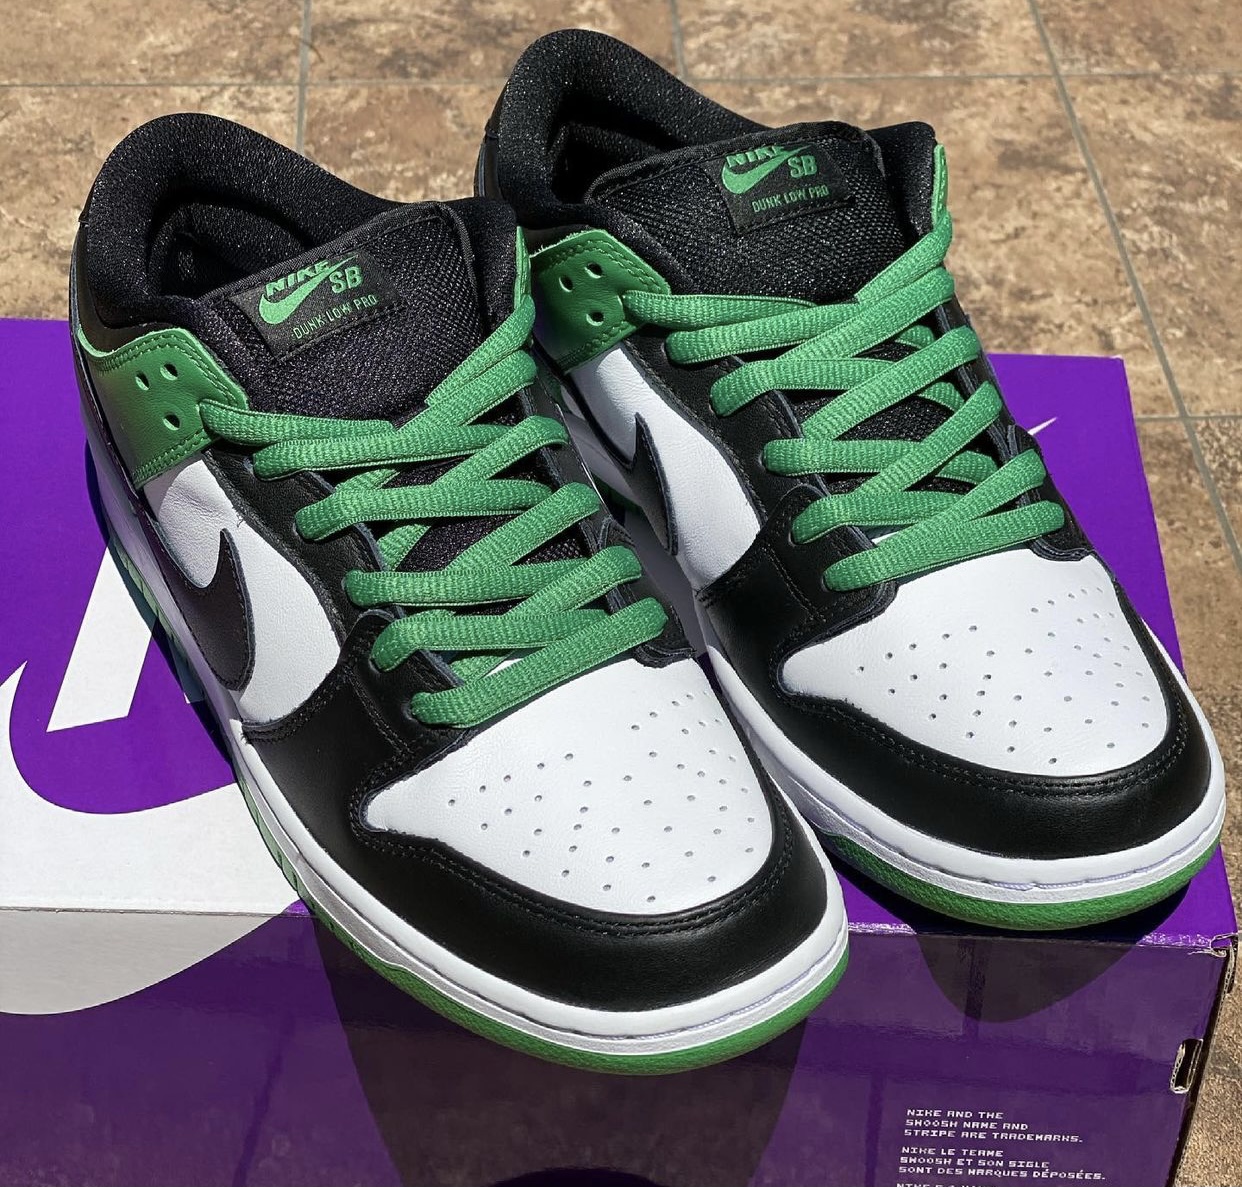 Check out these latest images of the “Classic Green” Nike Dunk Low SB ...